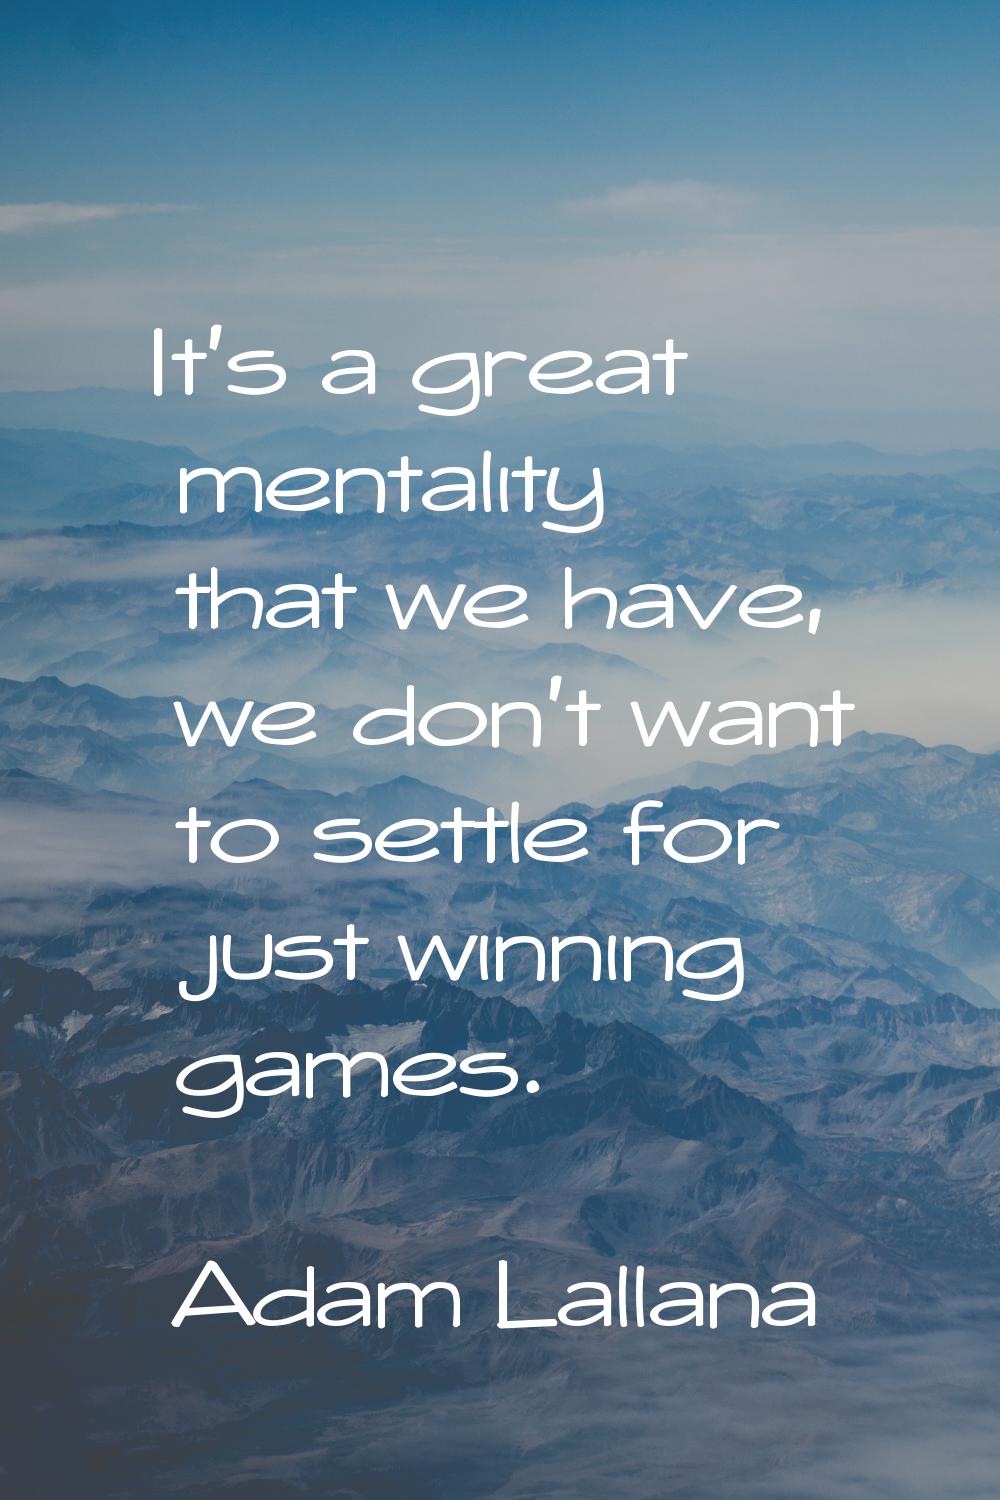 It's a great mentality that we have, we don't want to settle for just winning games.